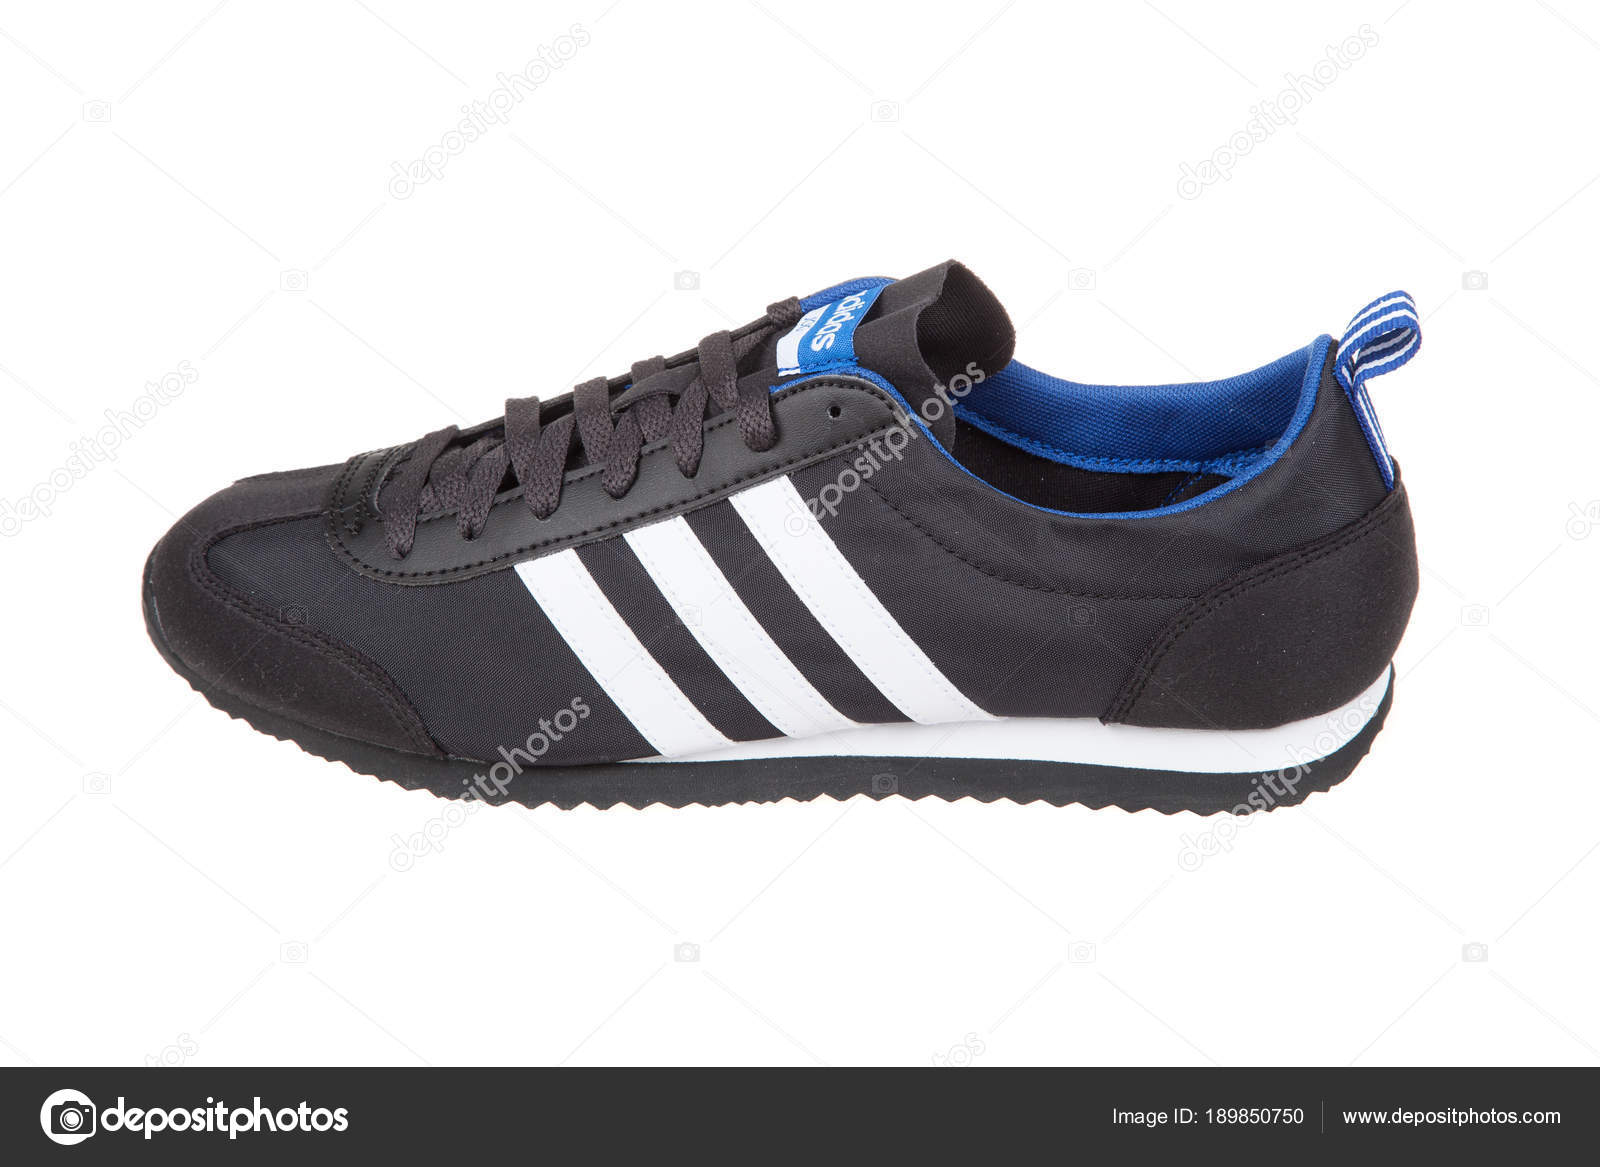 adidas shoes sports 2018